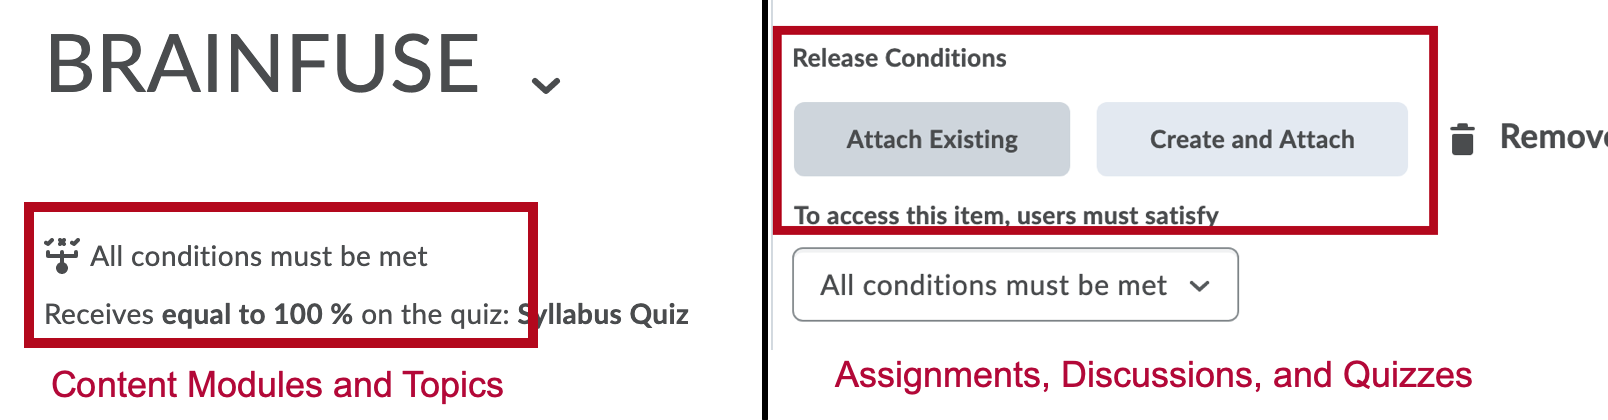 Identifies location of release conditions